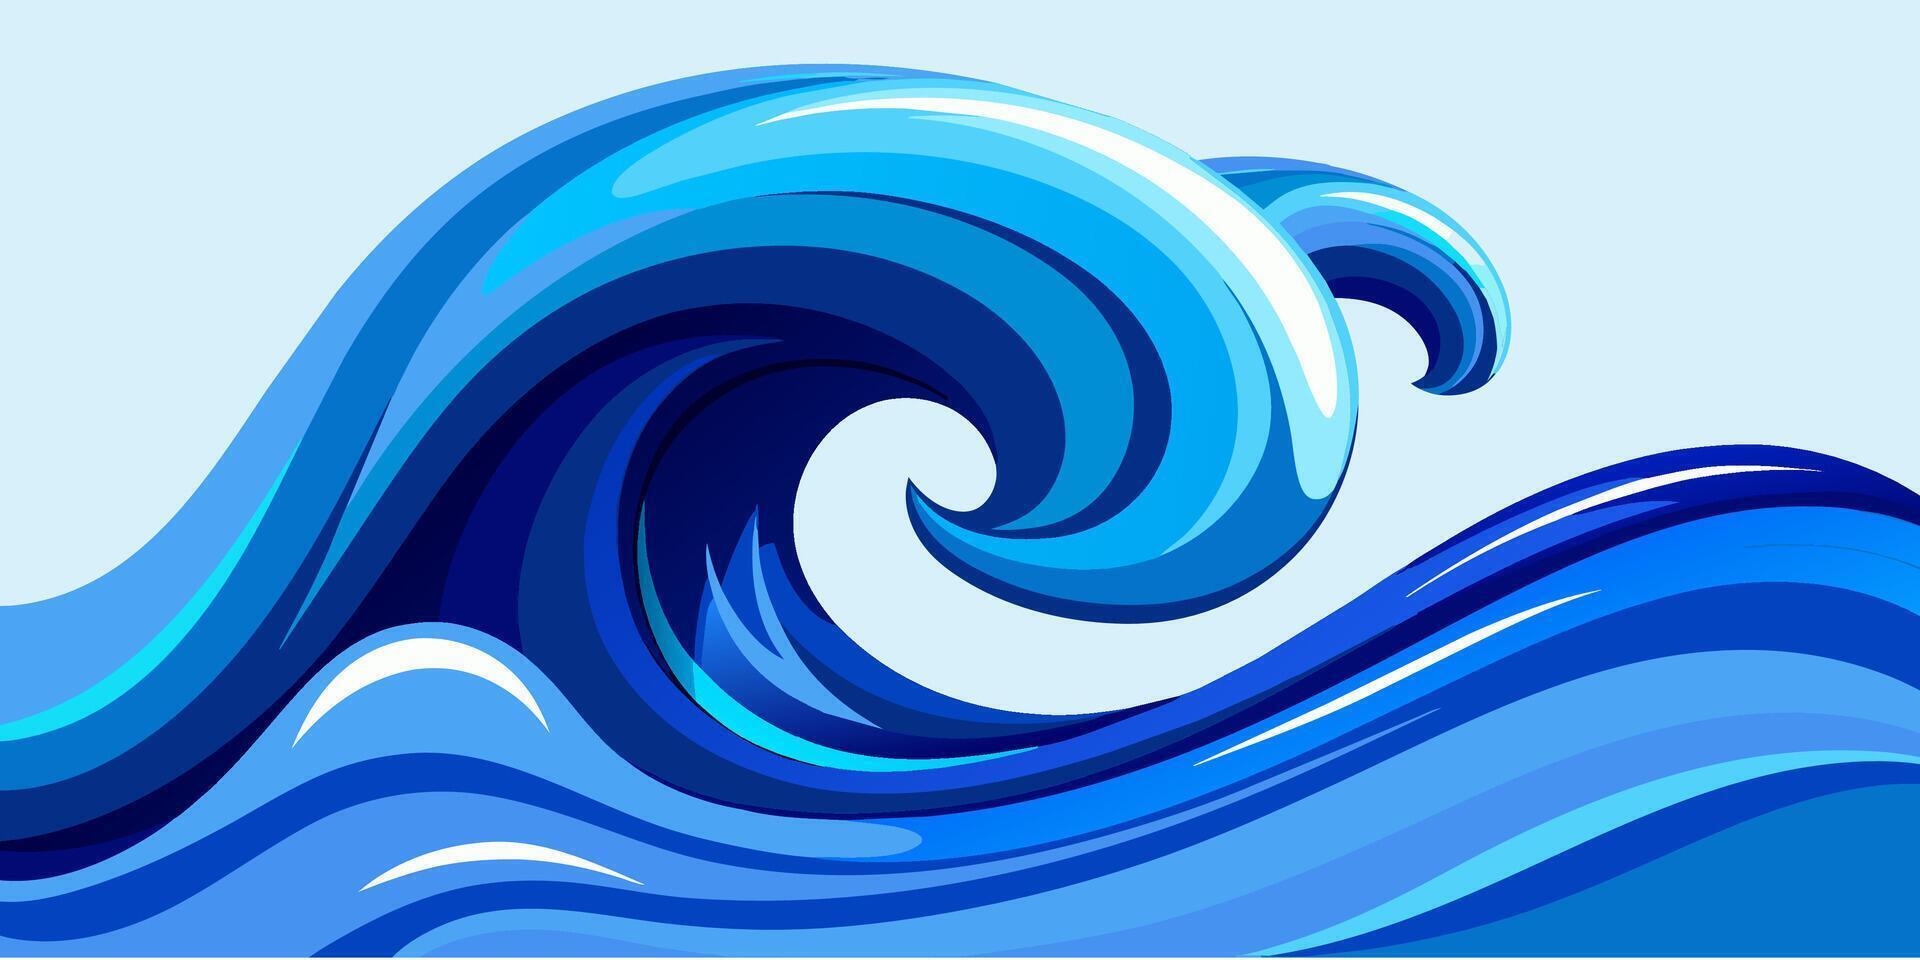 Abstract Blue Wave on Background. Illustration vector